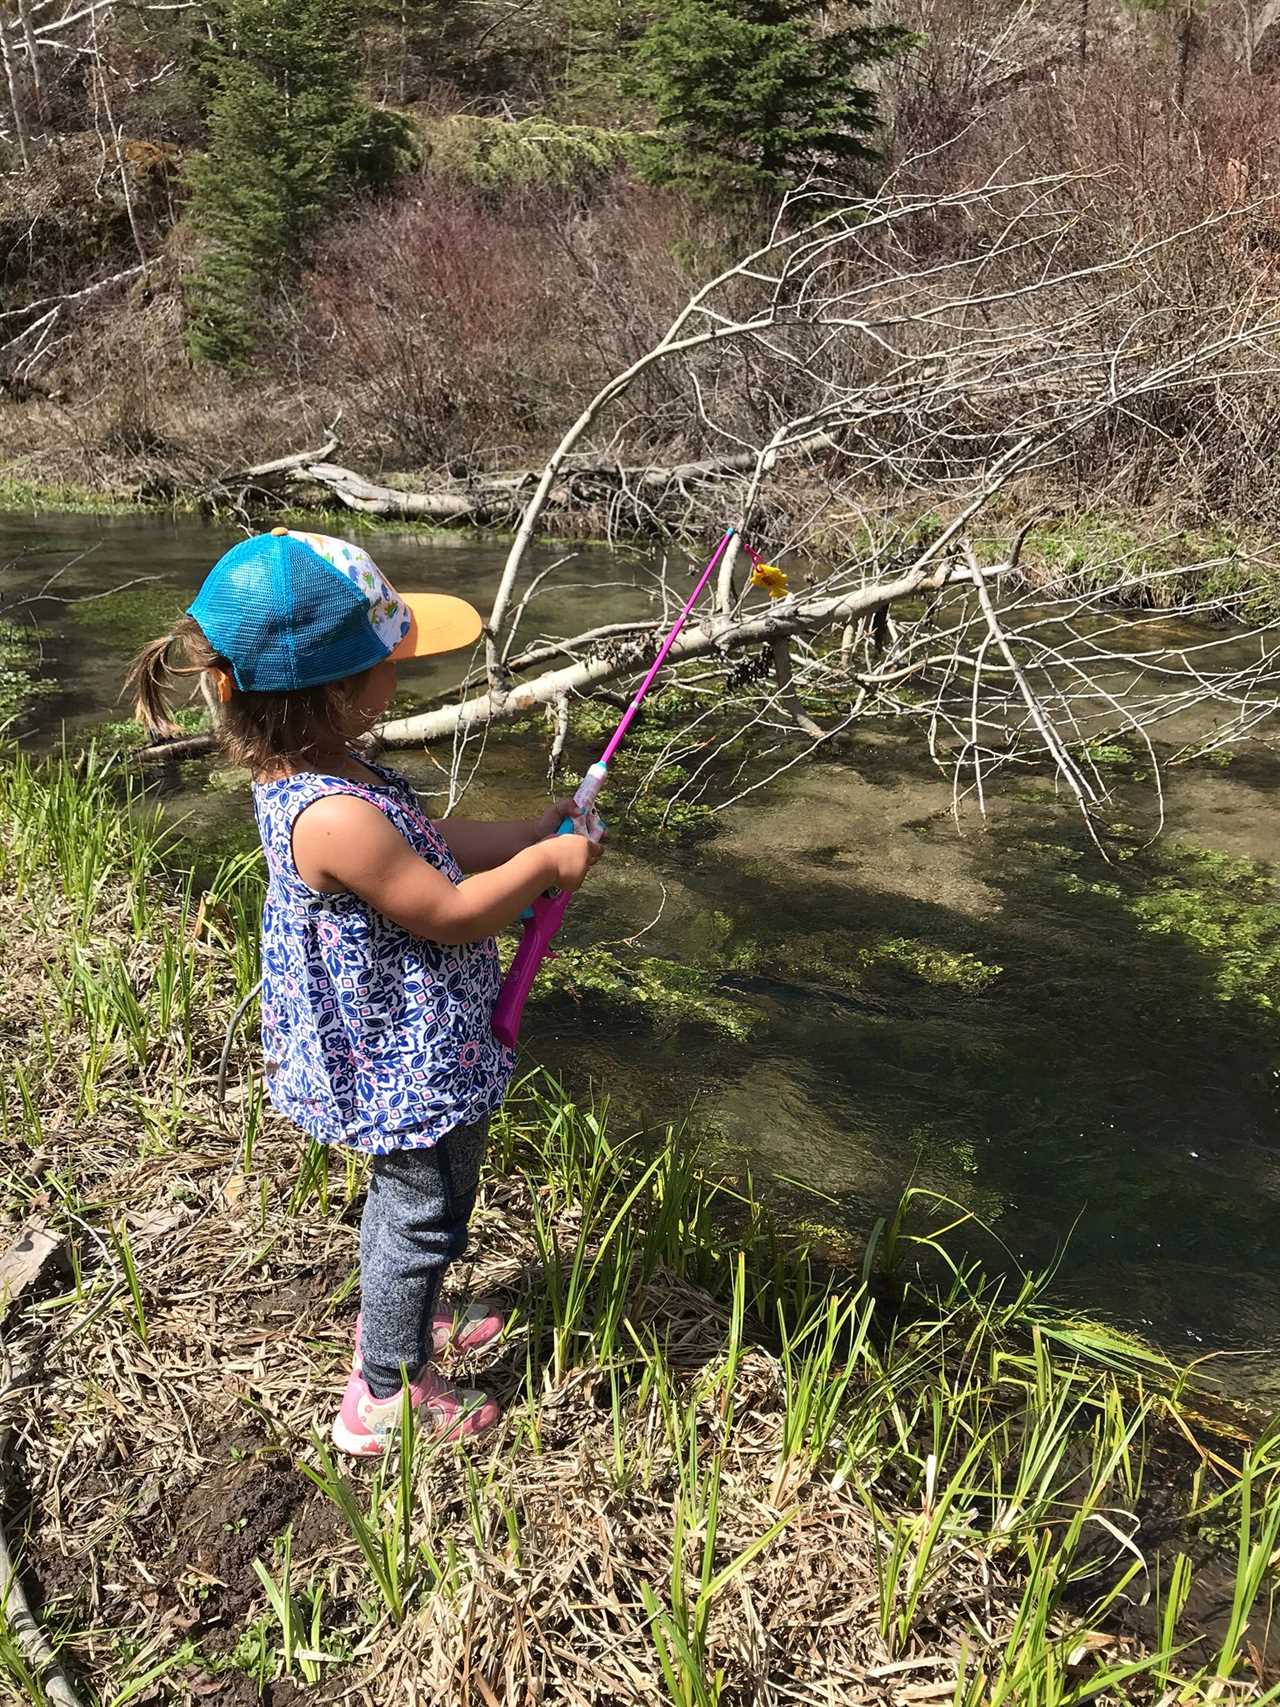 The best kids fishing poles help new anglers get started.